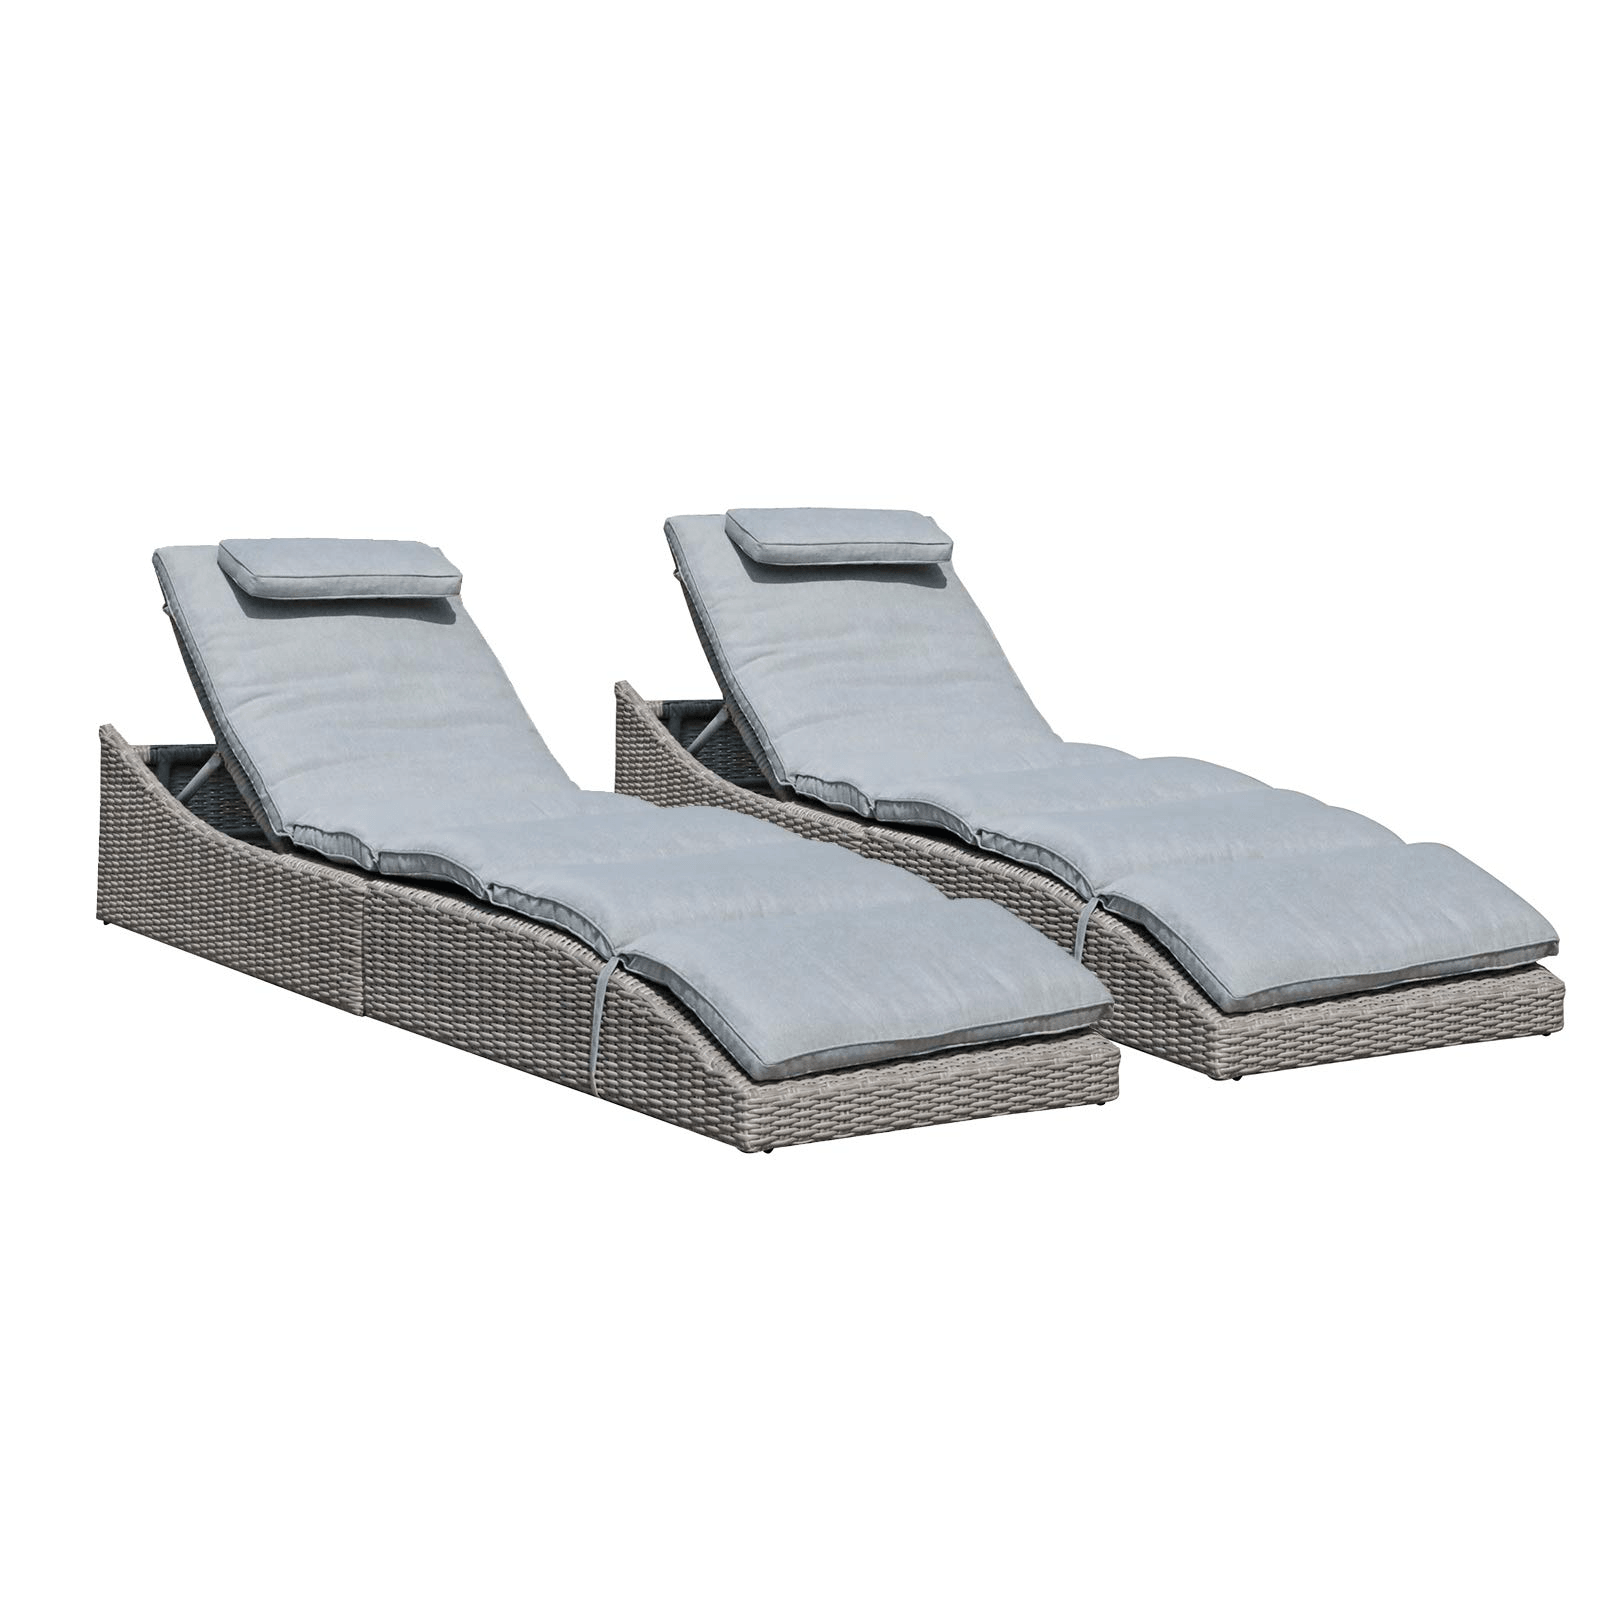 Perth Folding Chaise Lounge with Grey Cushion, Set of Two sale - OrangeCasual